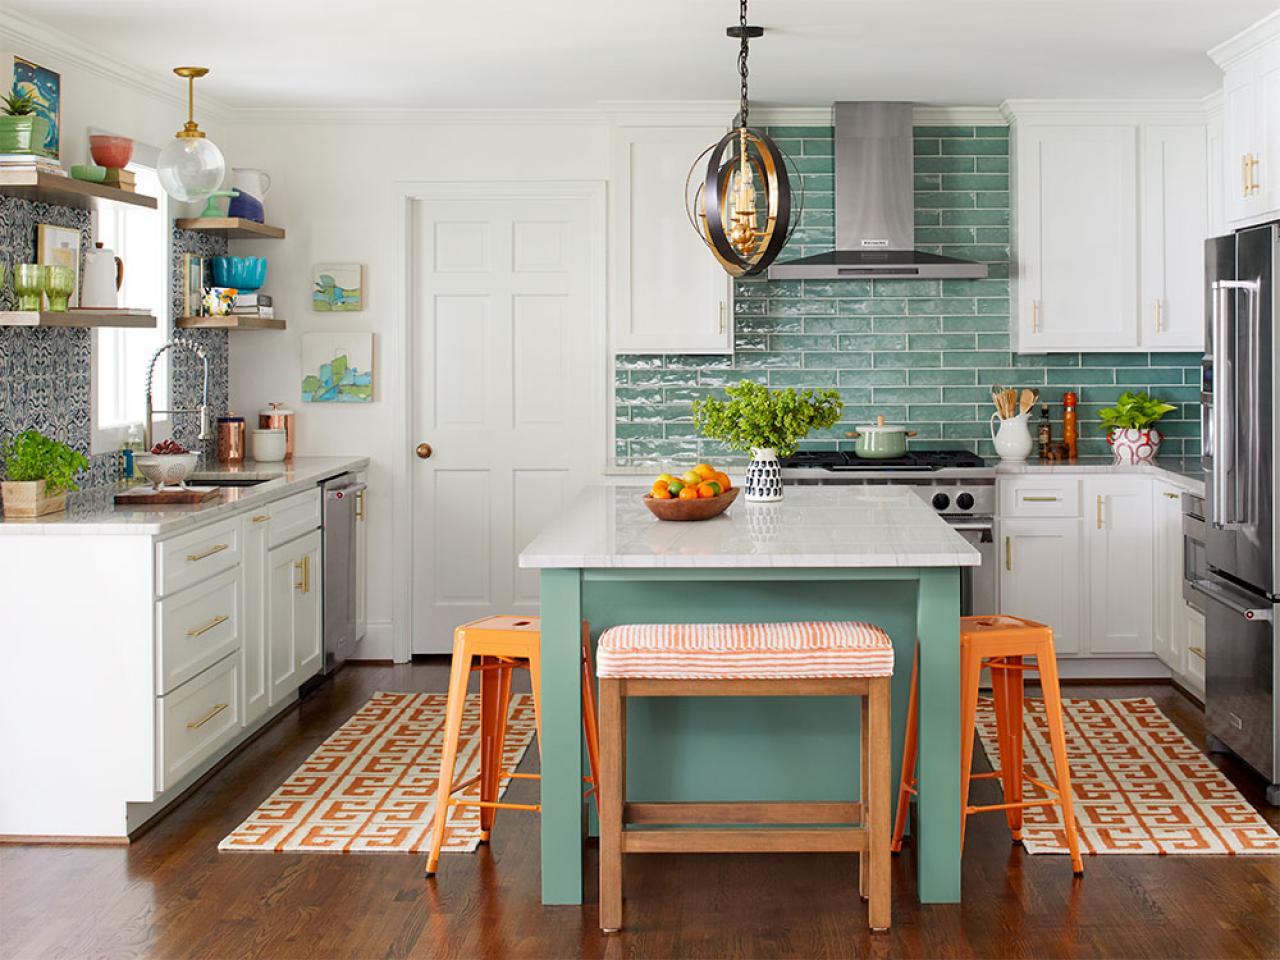 Easy Renovation Ideas to Make Your Kitchen Look Bigger   HGTV